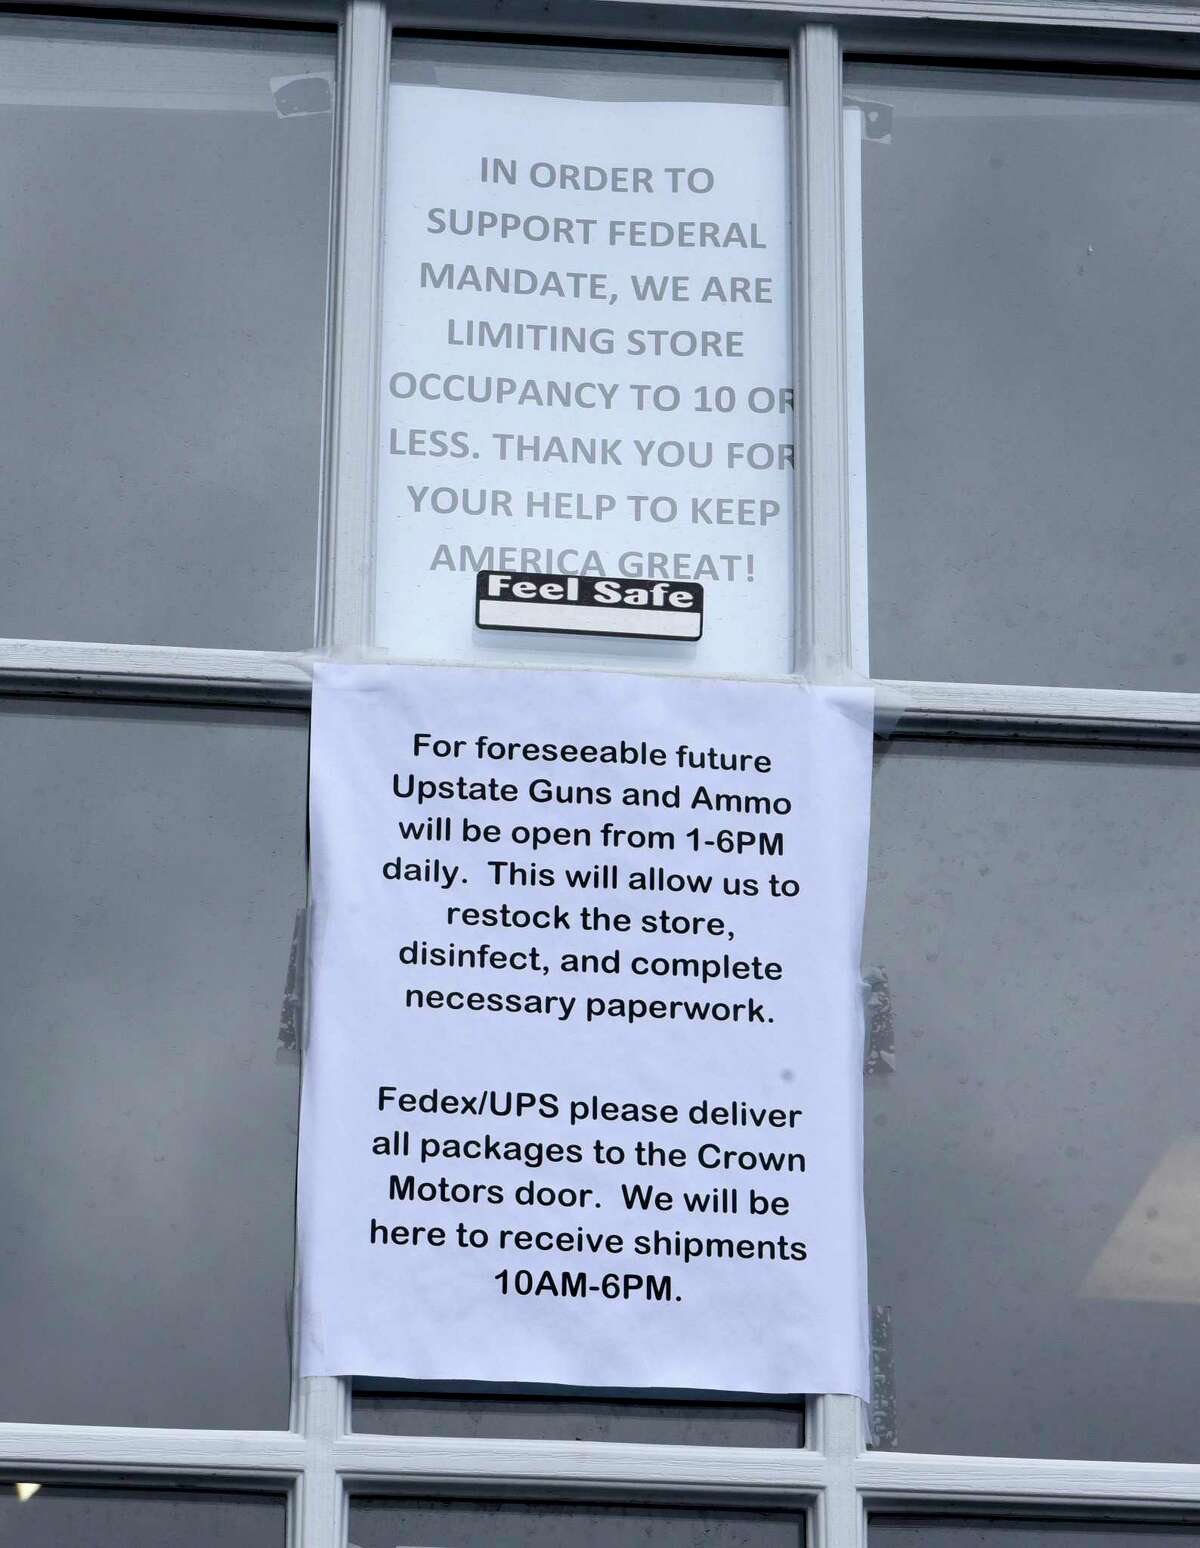 Compliance signs are posted on the door to keep up with mandates at Upstate Guns & Ammo store on Thursday, March 19, 2020 in Schenectady N.Y. (Lori Van Buren/Times Union)